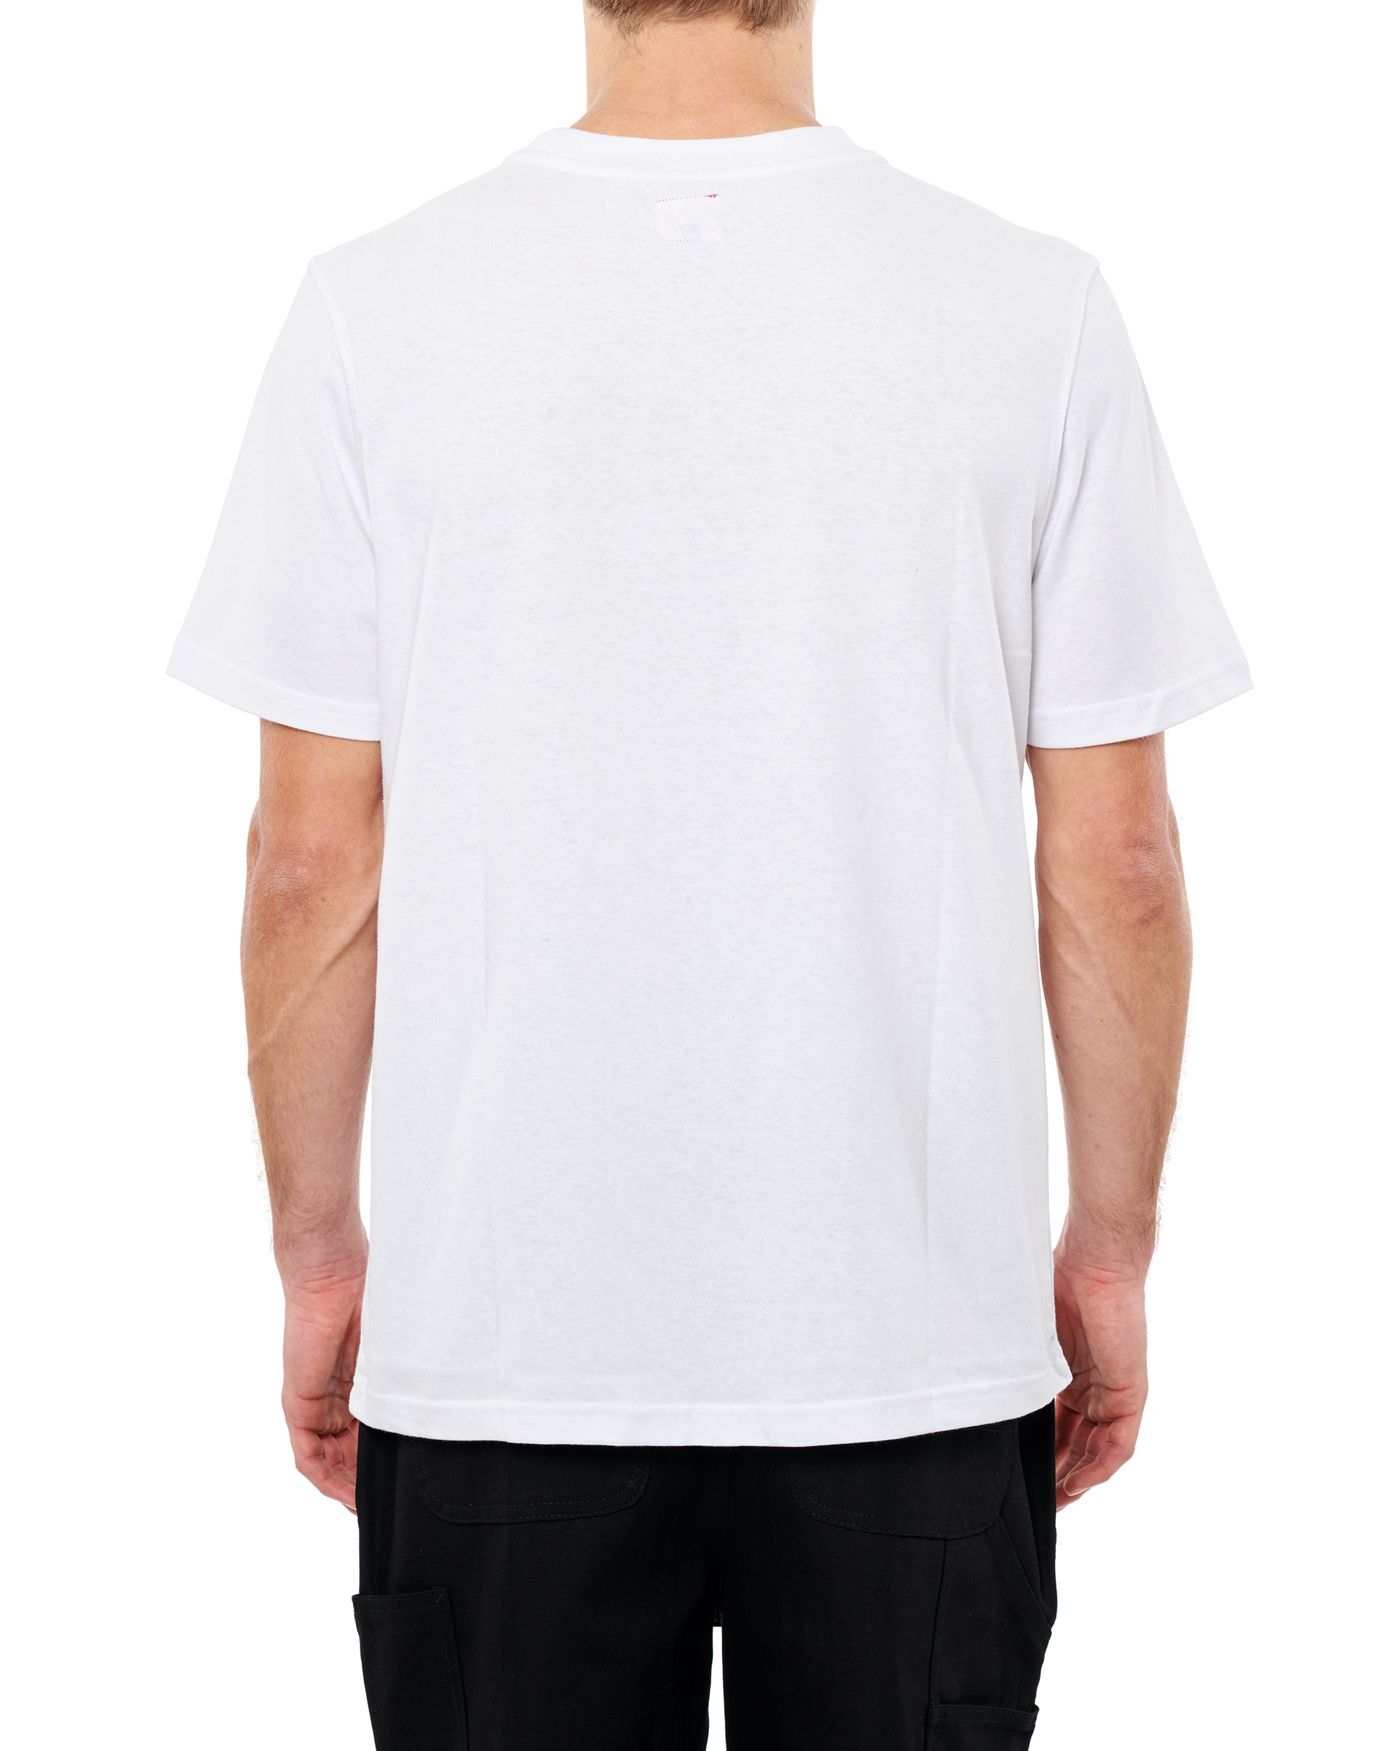 Photo of Hungry Heart S/S Pocket T-shirt, White